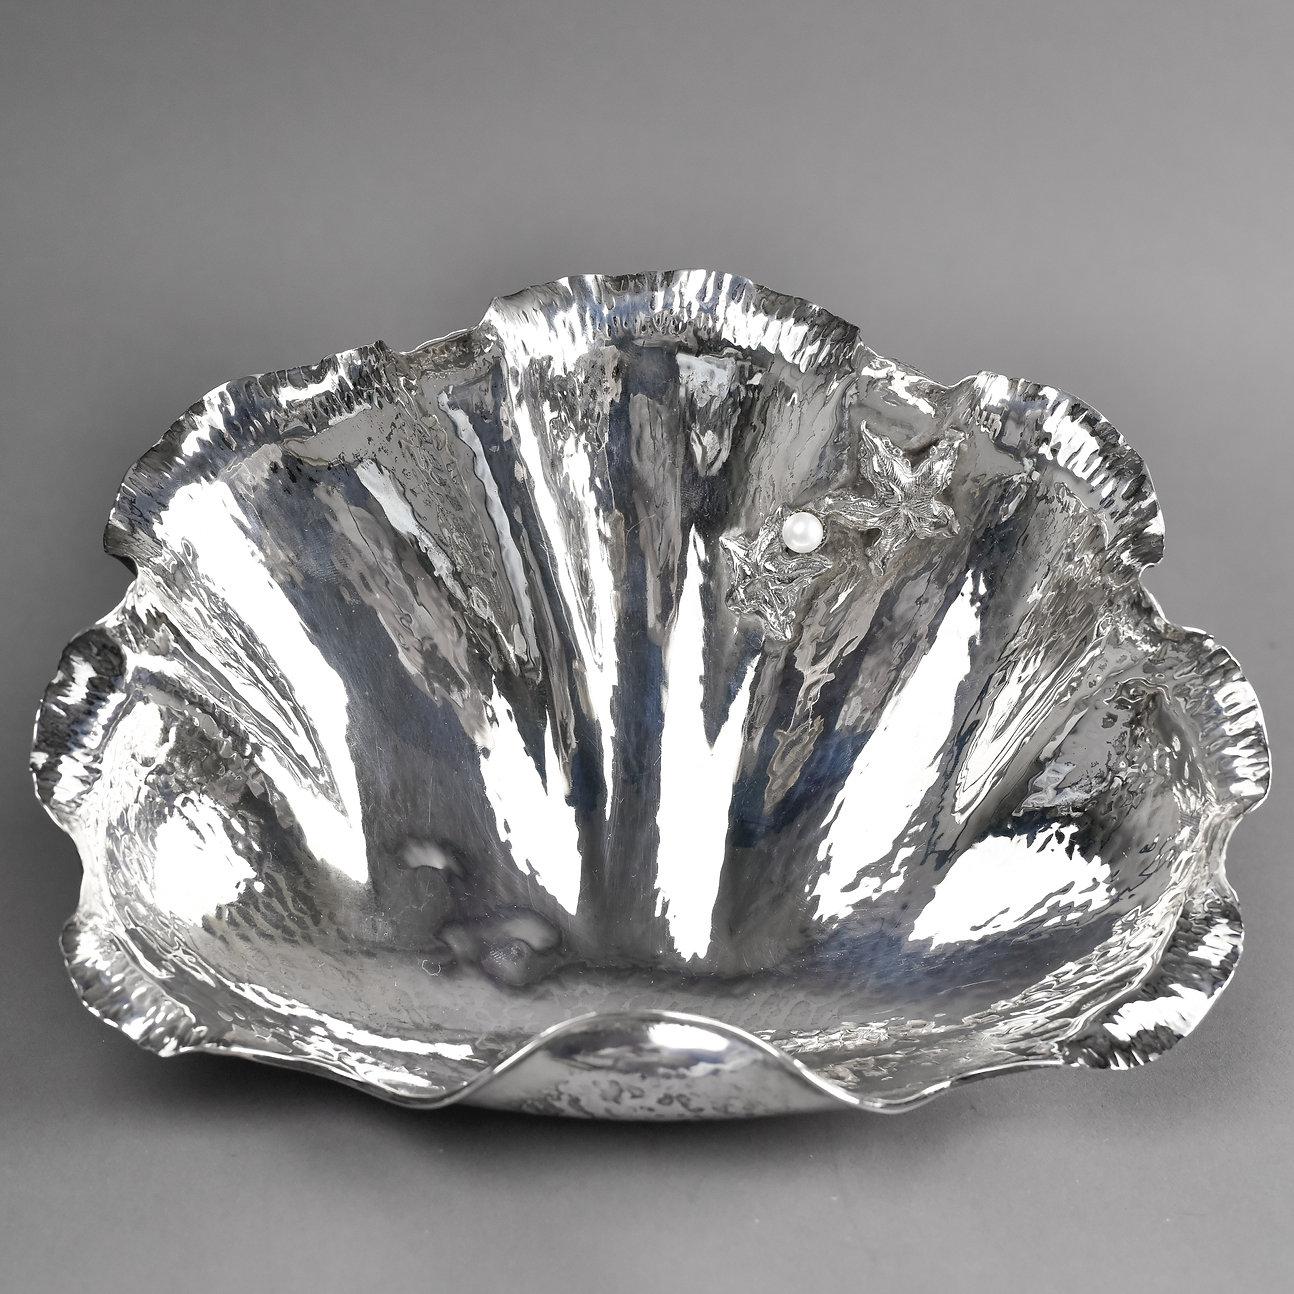 Exquisite silver shell-shaped dish
Beautiful hammered surface with a decorative sea stars
The dish is standing on three ornamented legs
Hallmark 925 sterling
Mastermark mni
Condition excellent. Two minor bumps inside the dish are almost not visible.